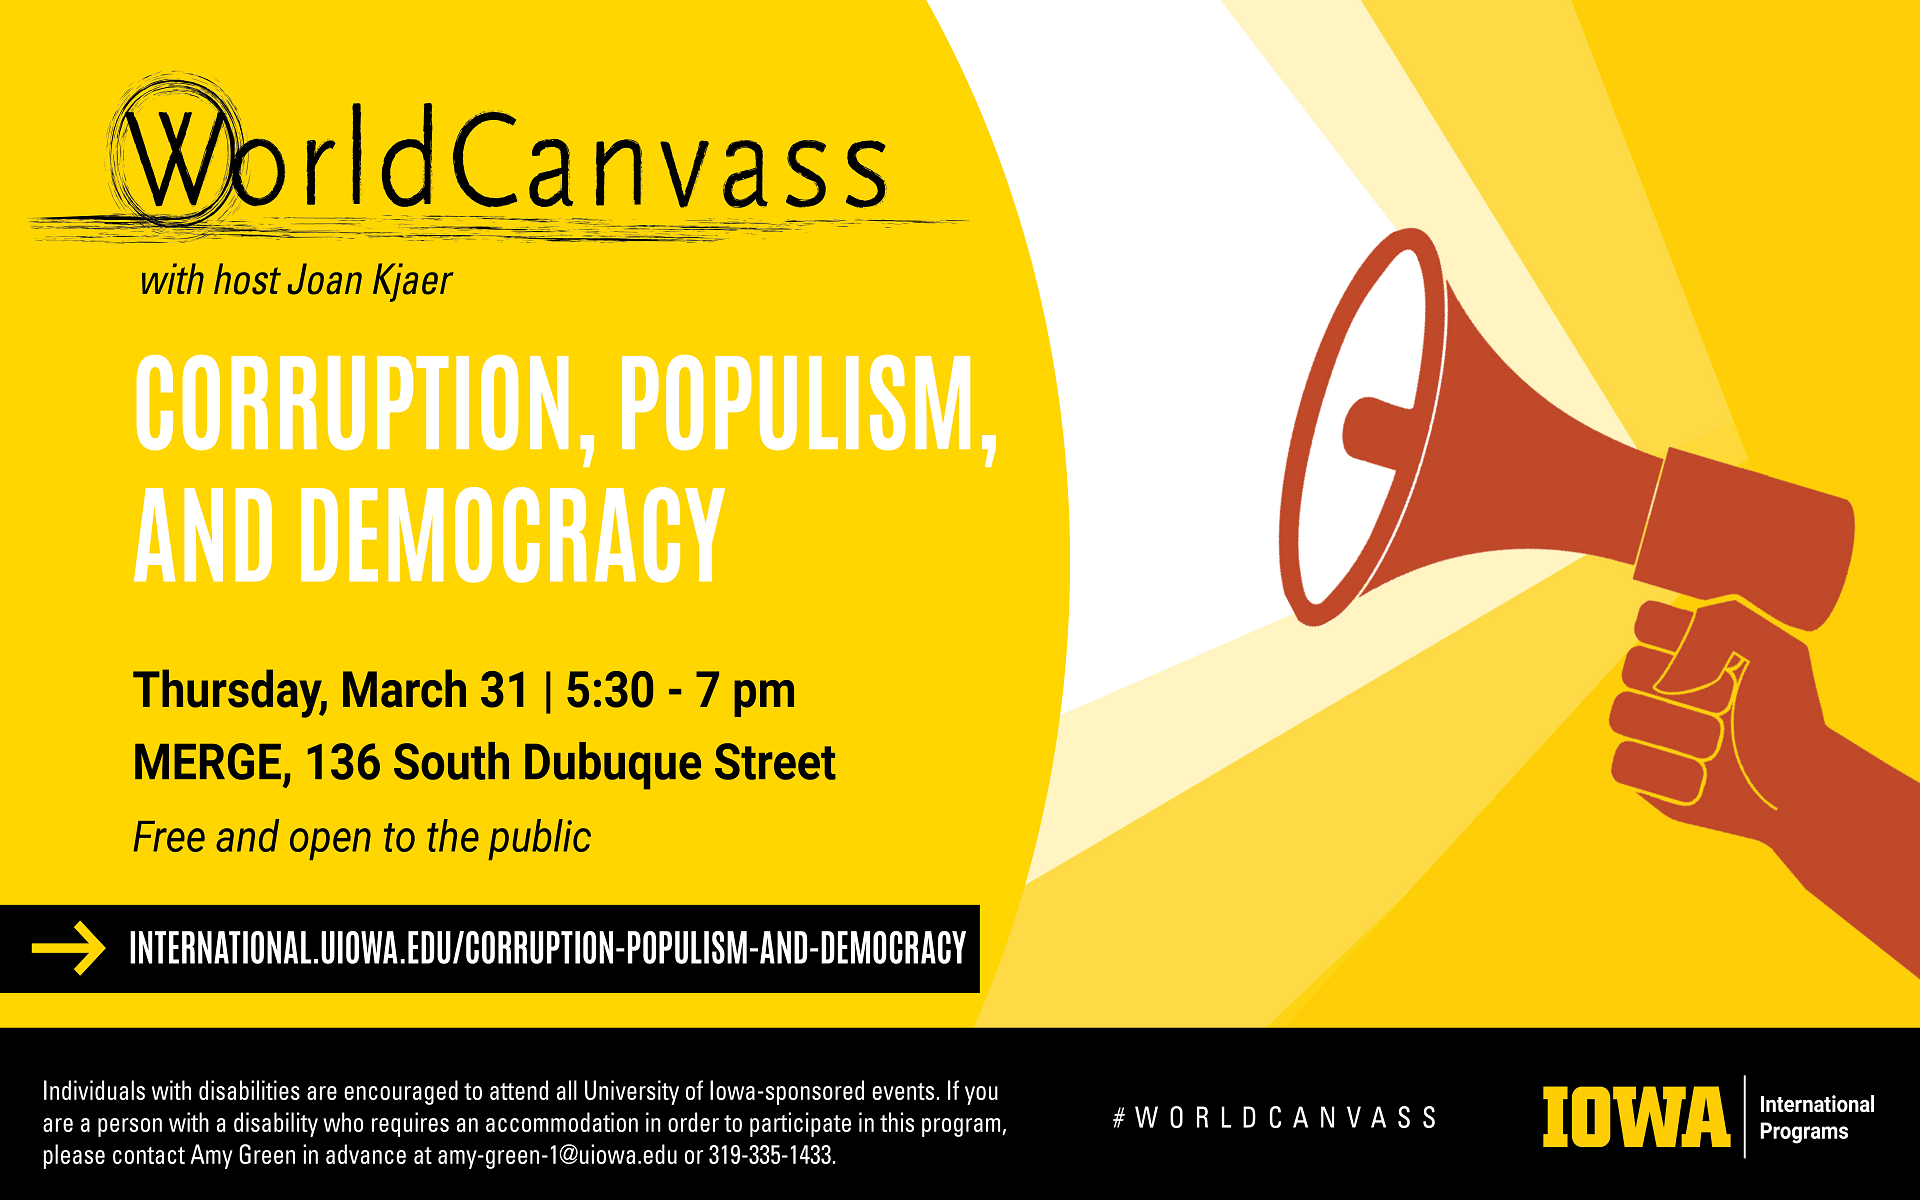 World canvas with host Joan Kjaer presents corruption populism and democracy on Thursday, March 31 from 5:30 PM to 7 PM at merge at 1:36 S. Dubuque St. this event is free and open to the public to find out more visit international.uiowa.edu/corruption-populism–and-democracy